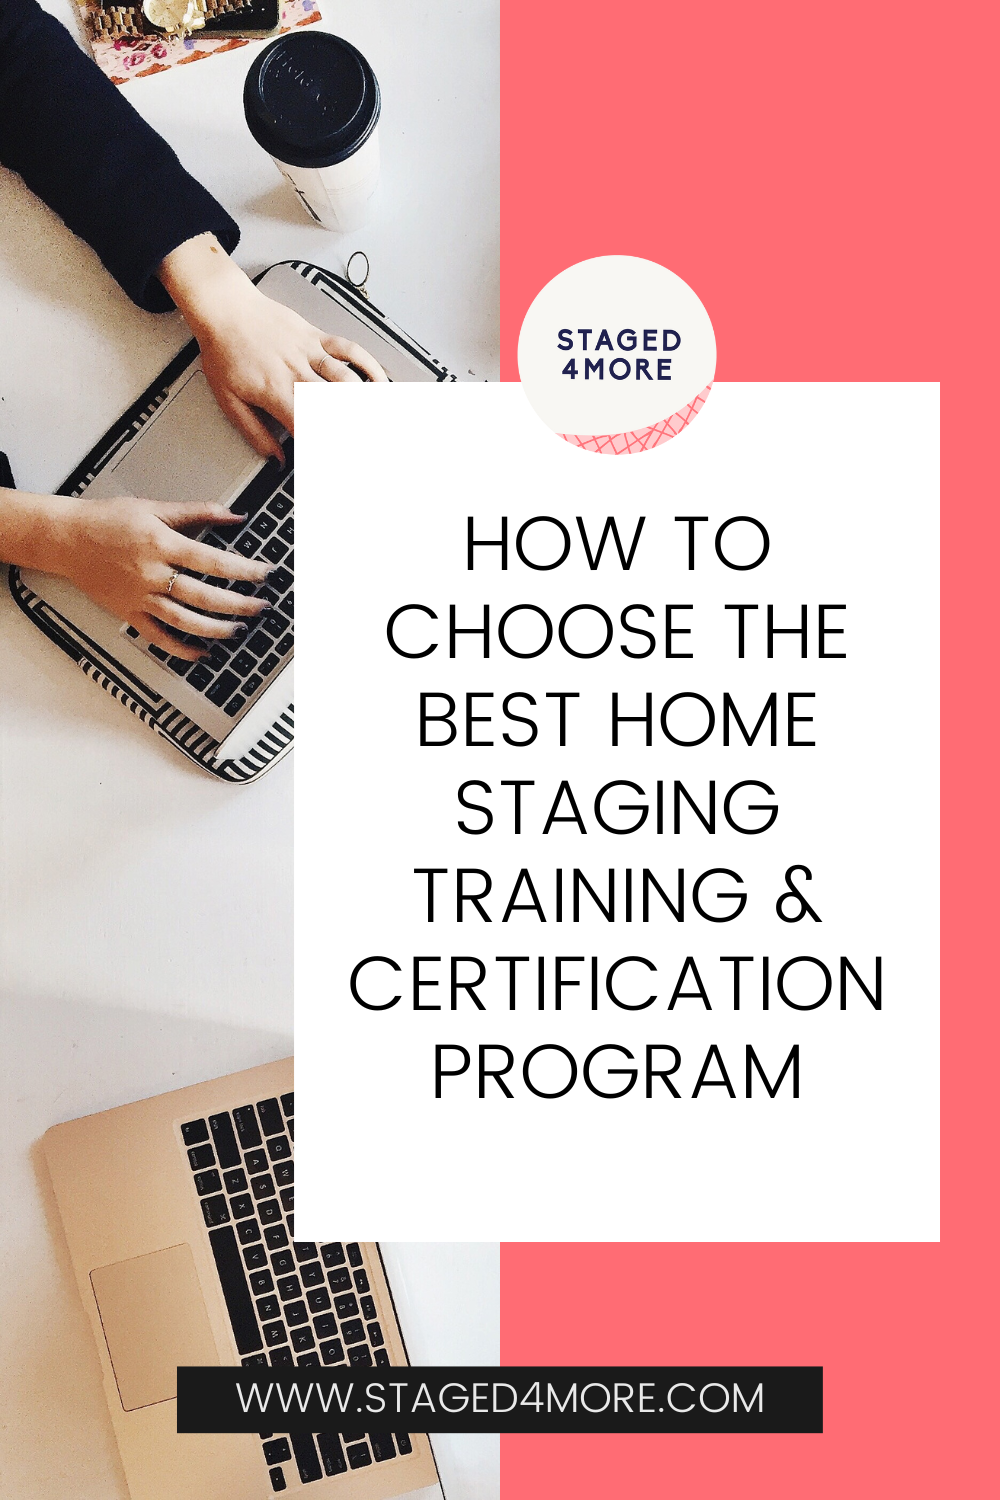 How to Choose the Best Home Staging Training & Certification Program